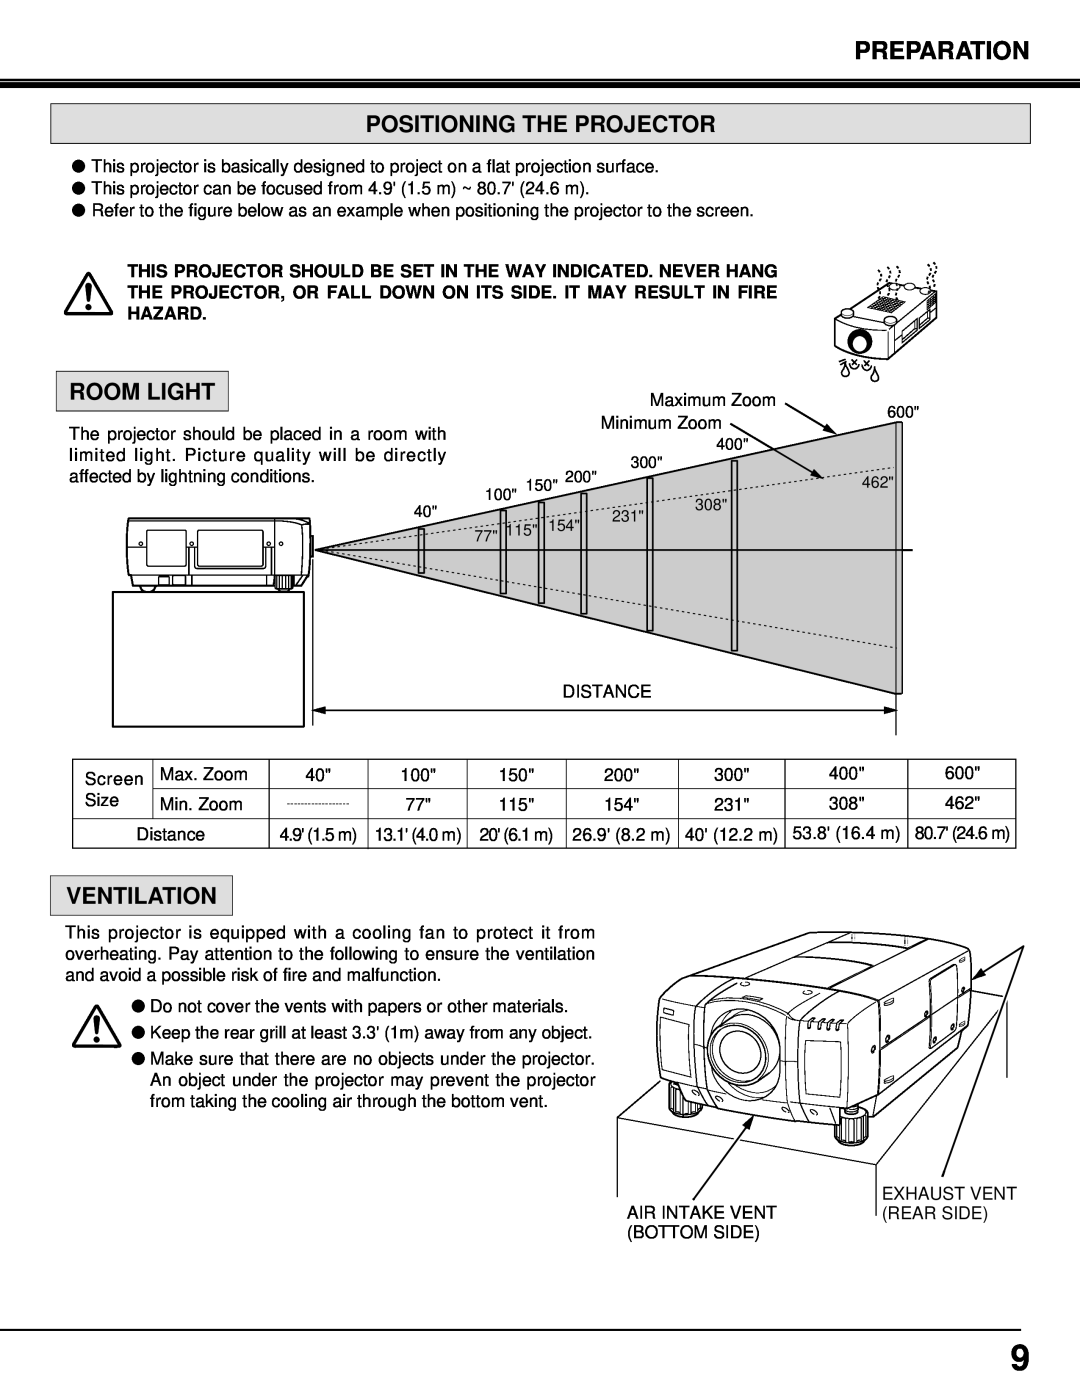 Eiki LC-X3/X3L instruction manual Positioning The Projector, Room Light, Ventilation, Preparation 